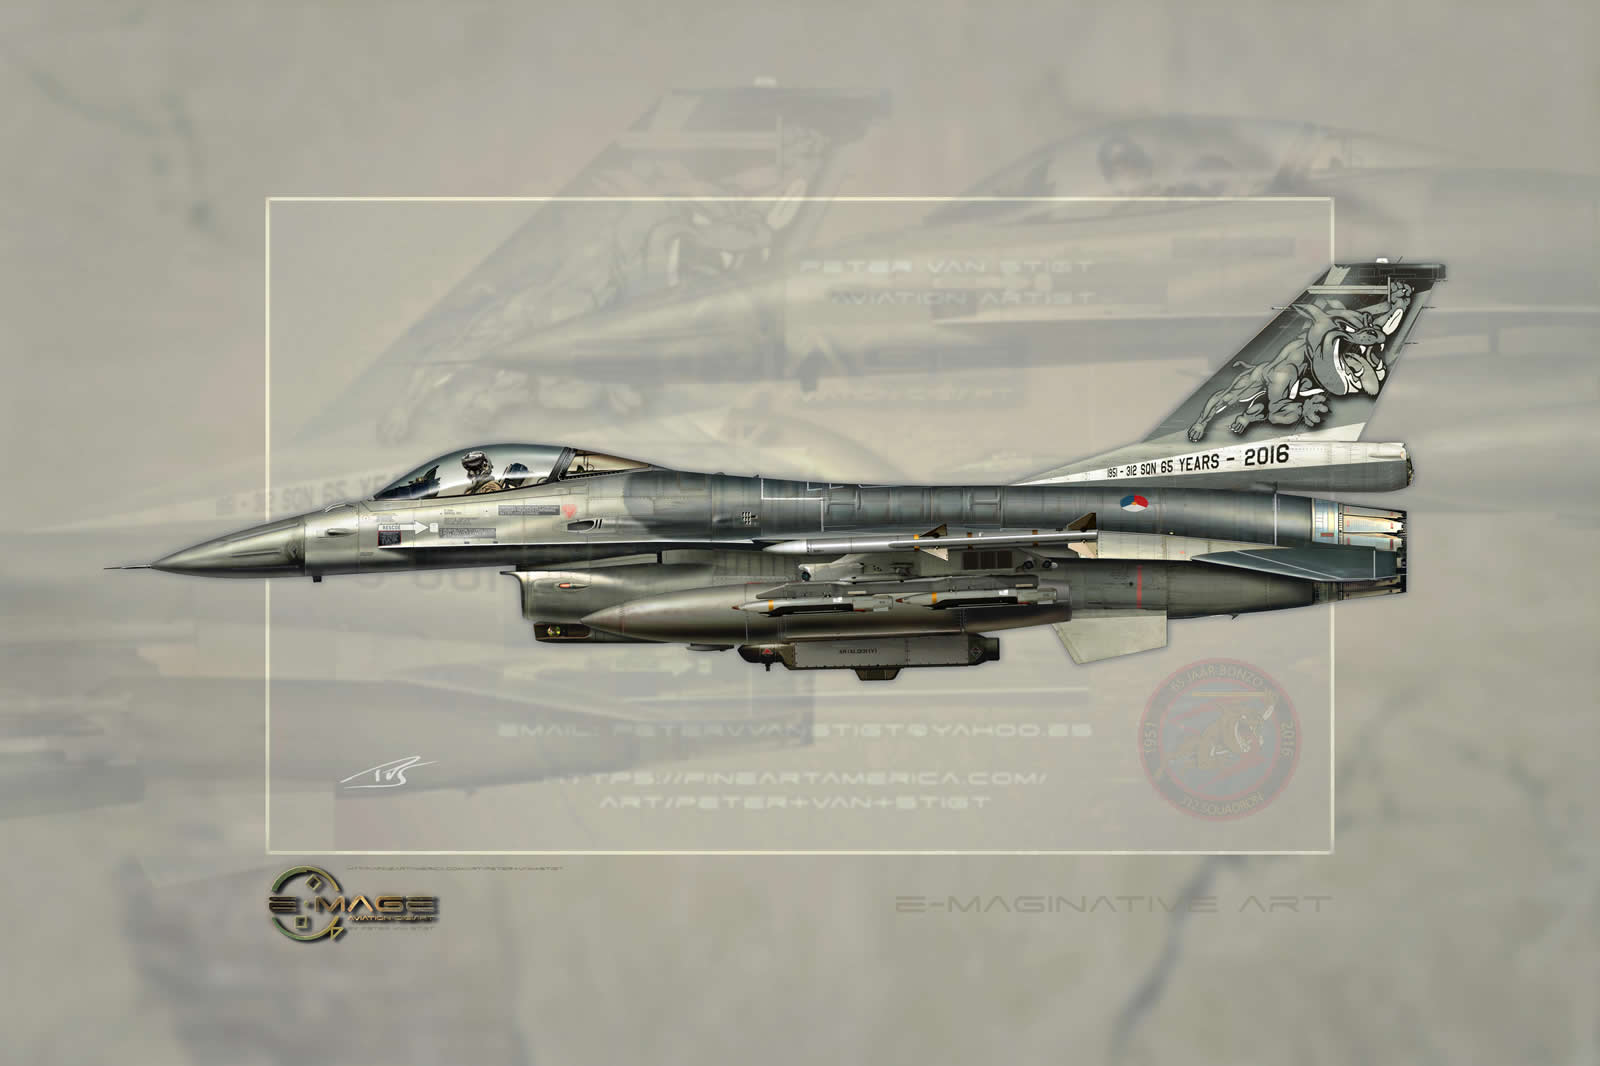 J-001 Special Tail F-16 Profile